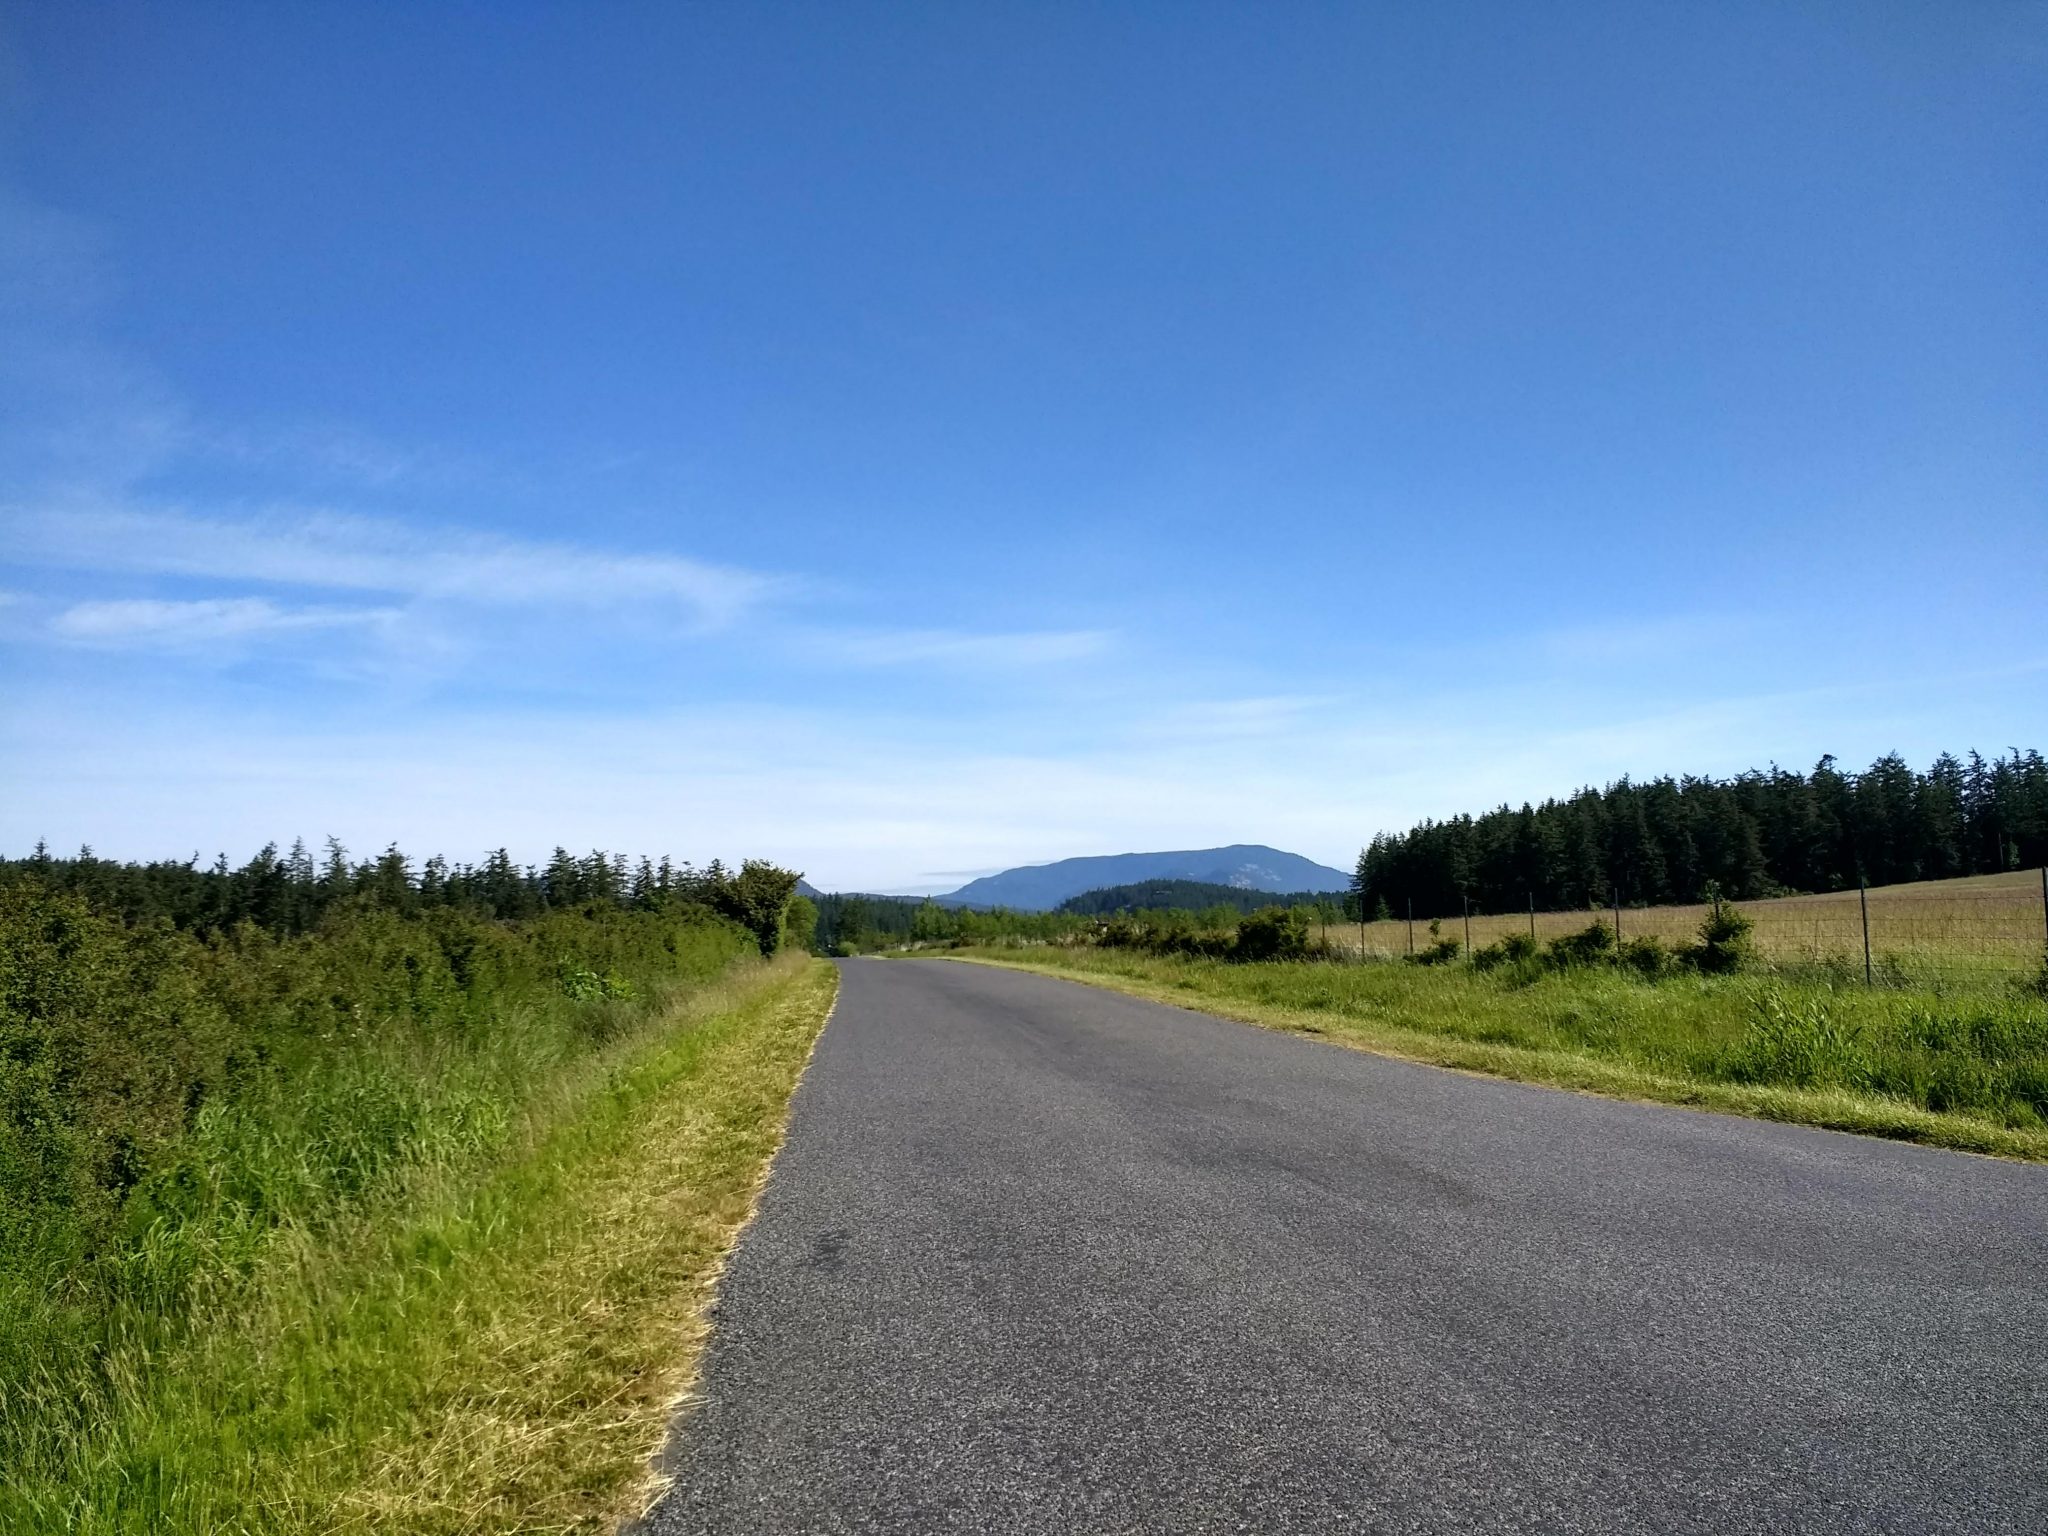 An empty country road goes between two fields. There are evergreen trees in the background